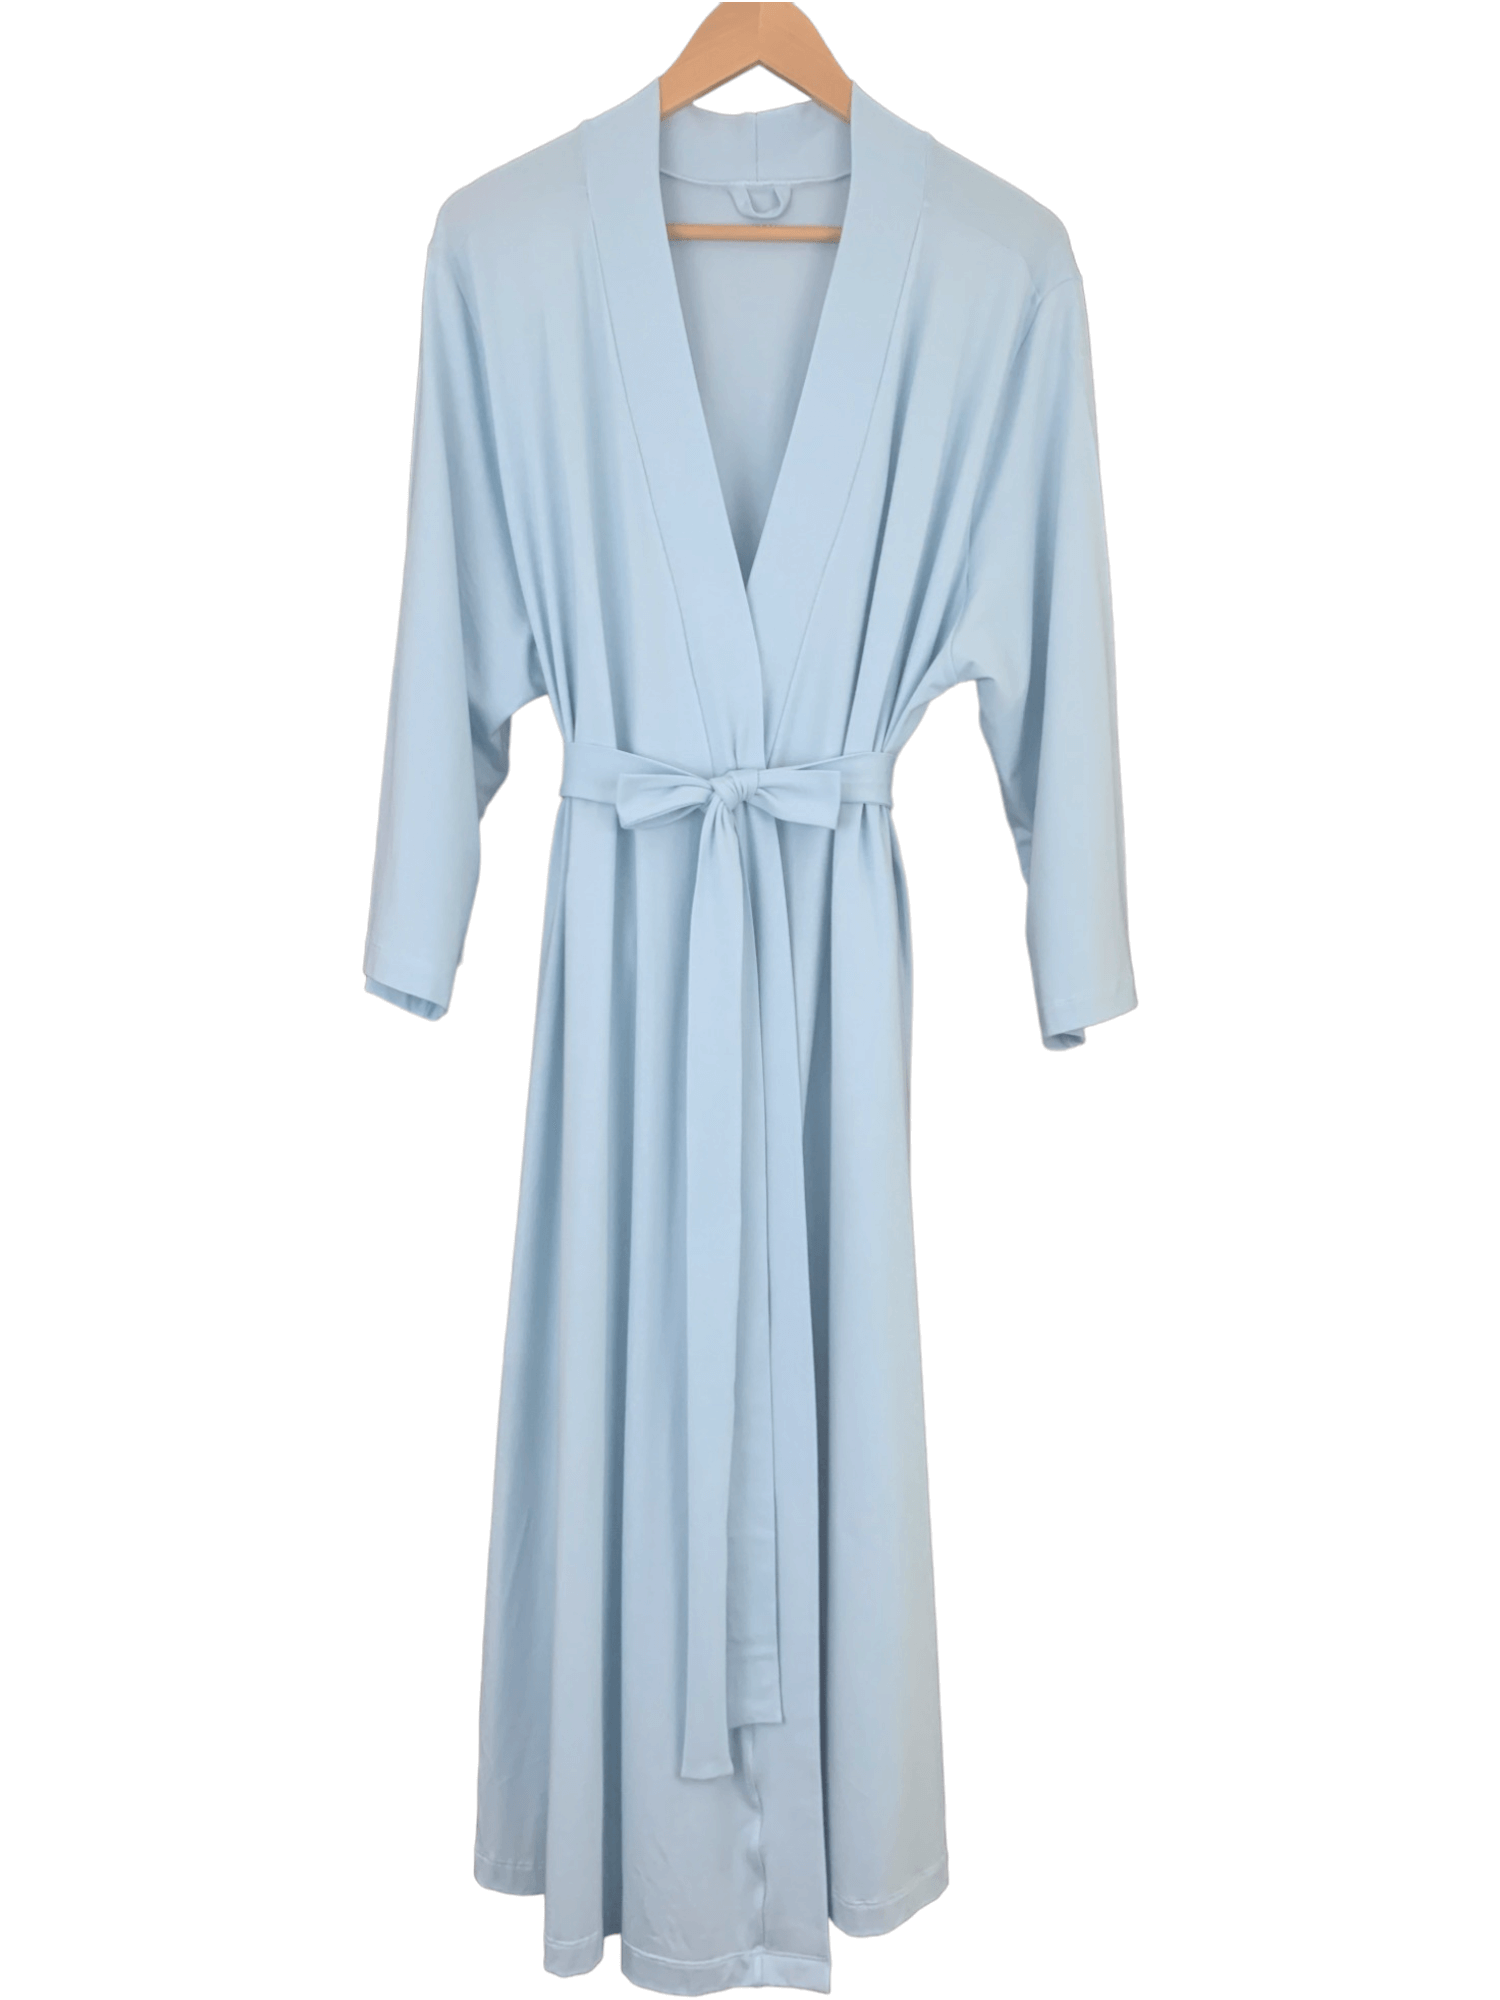 Solid light blue mommy robe